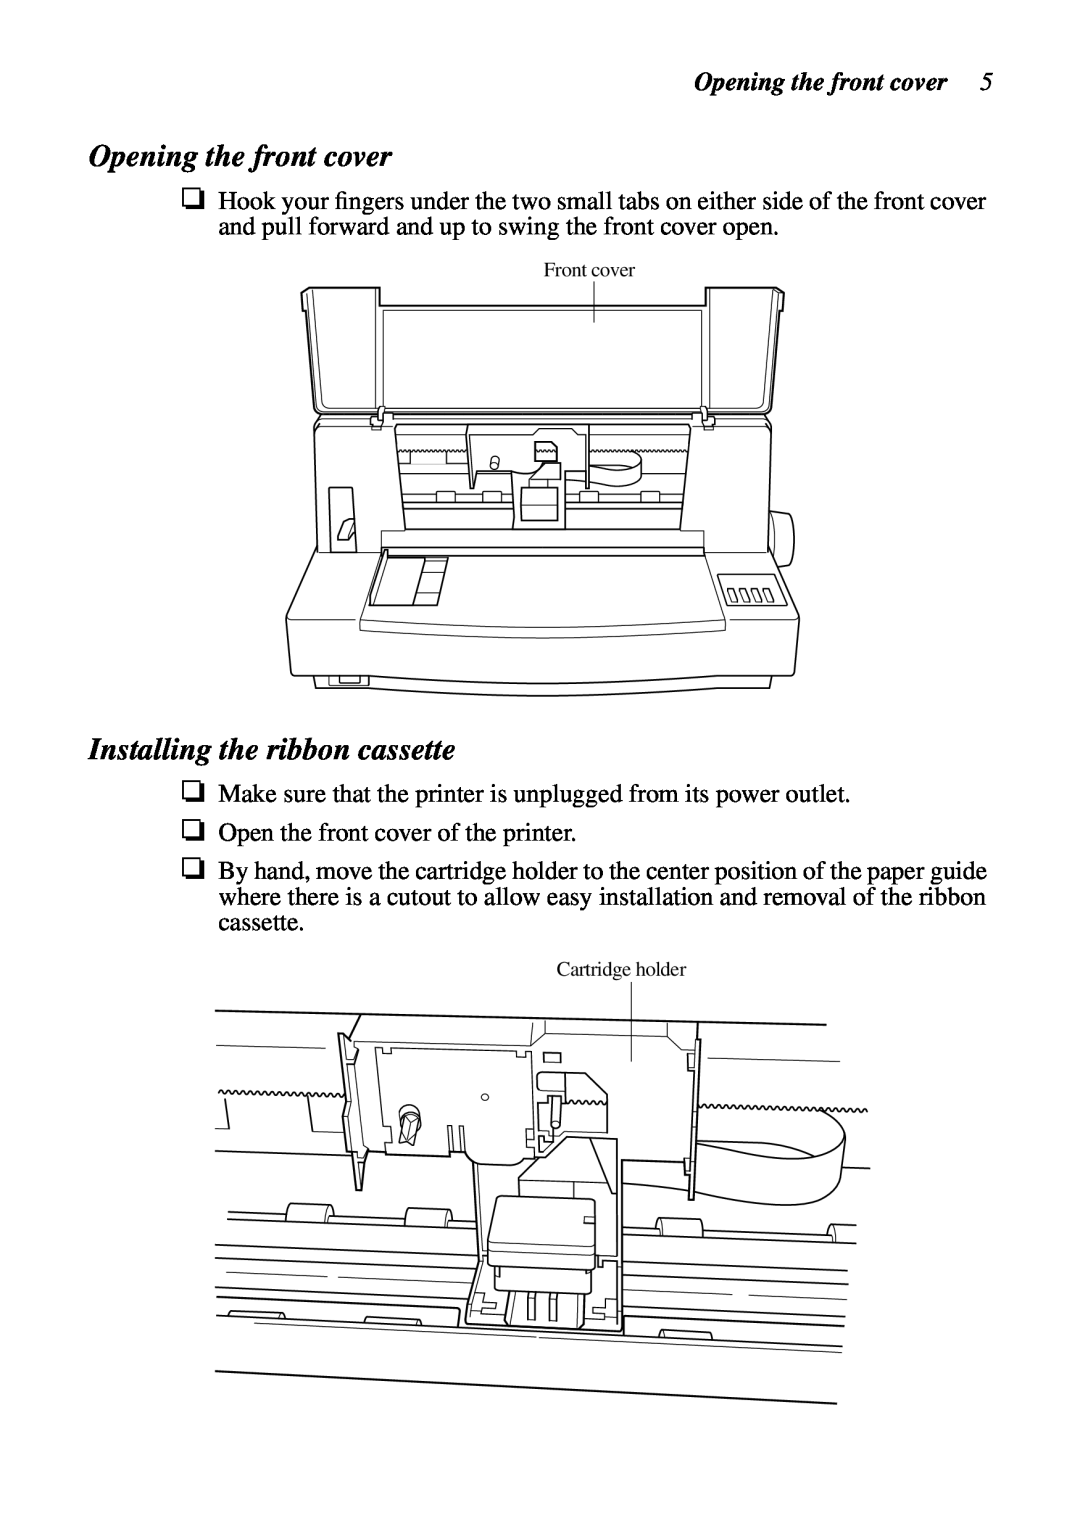 Star Micronics LC-7211 user manual Opening the front cover, Installing the ribbon cassette 